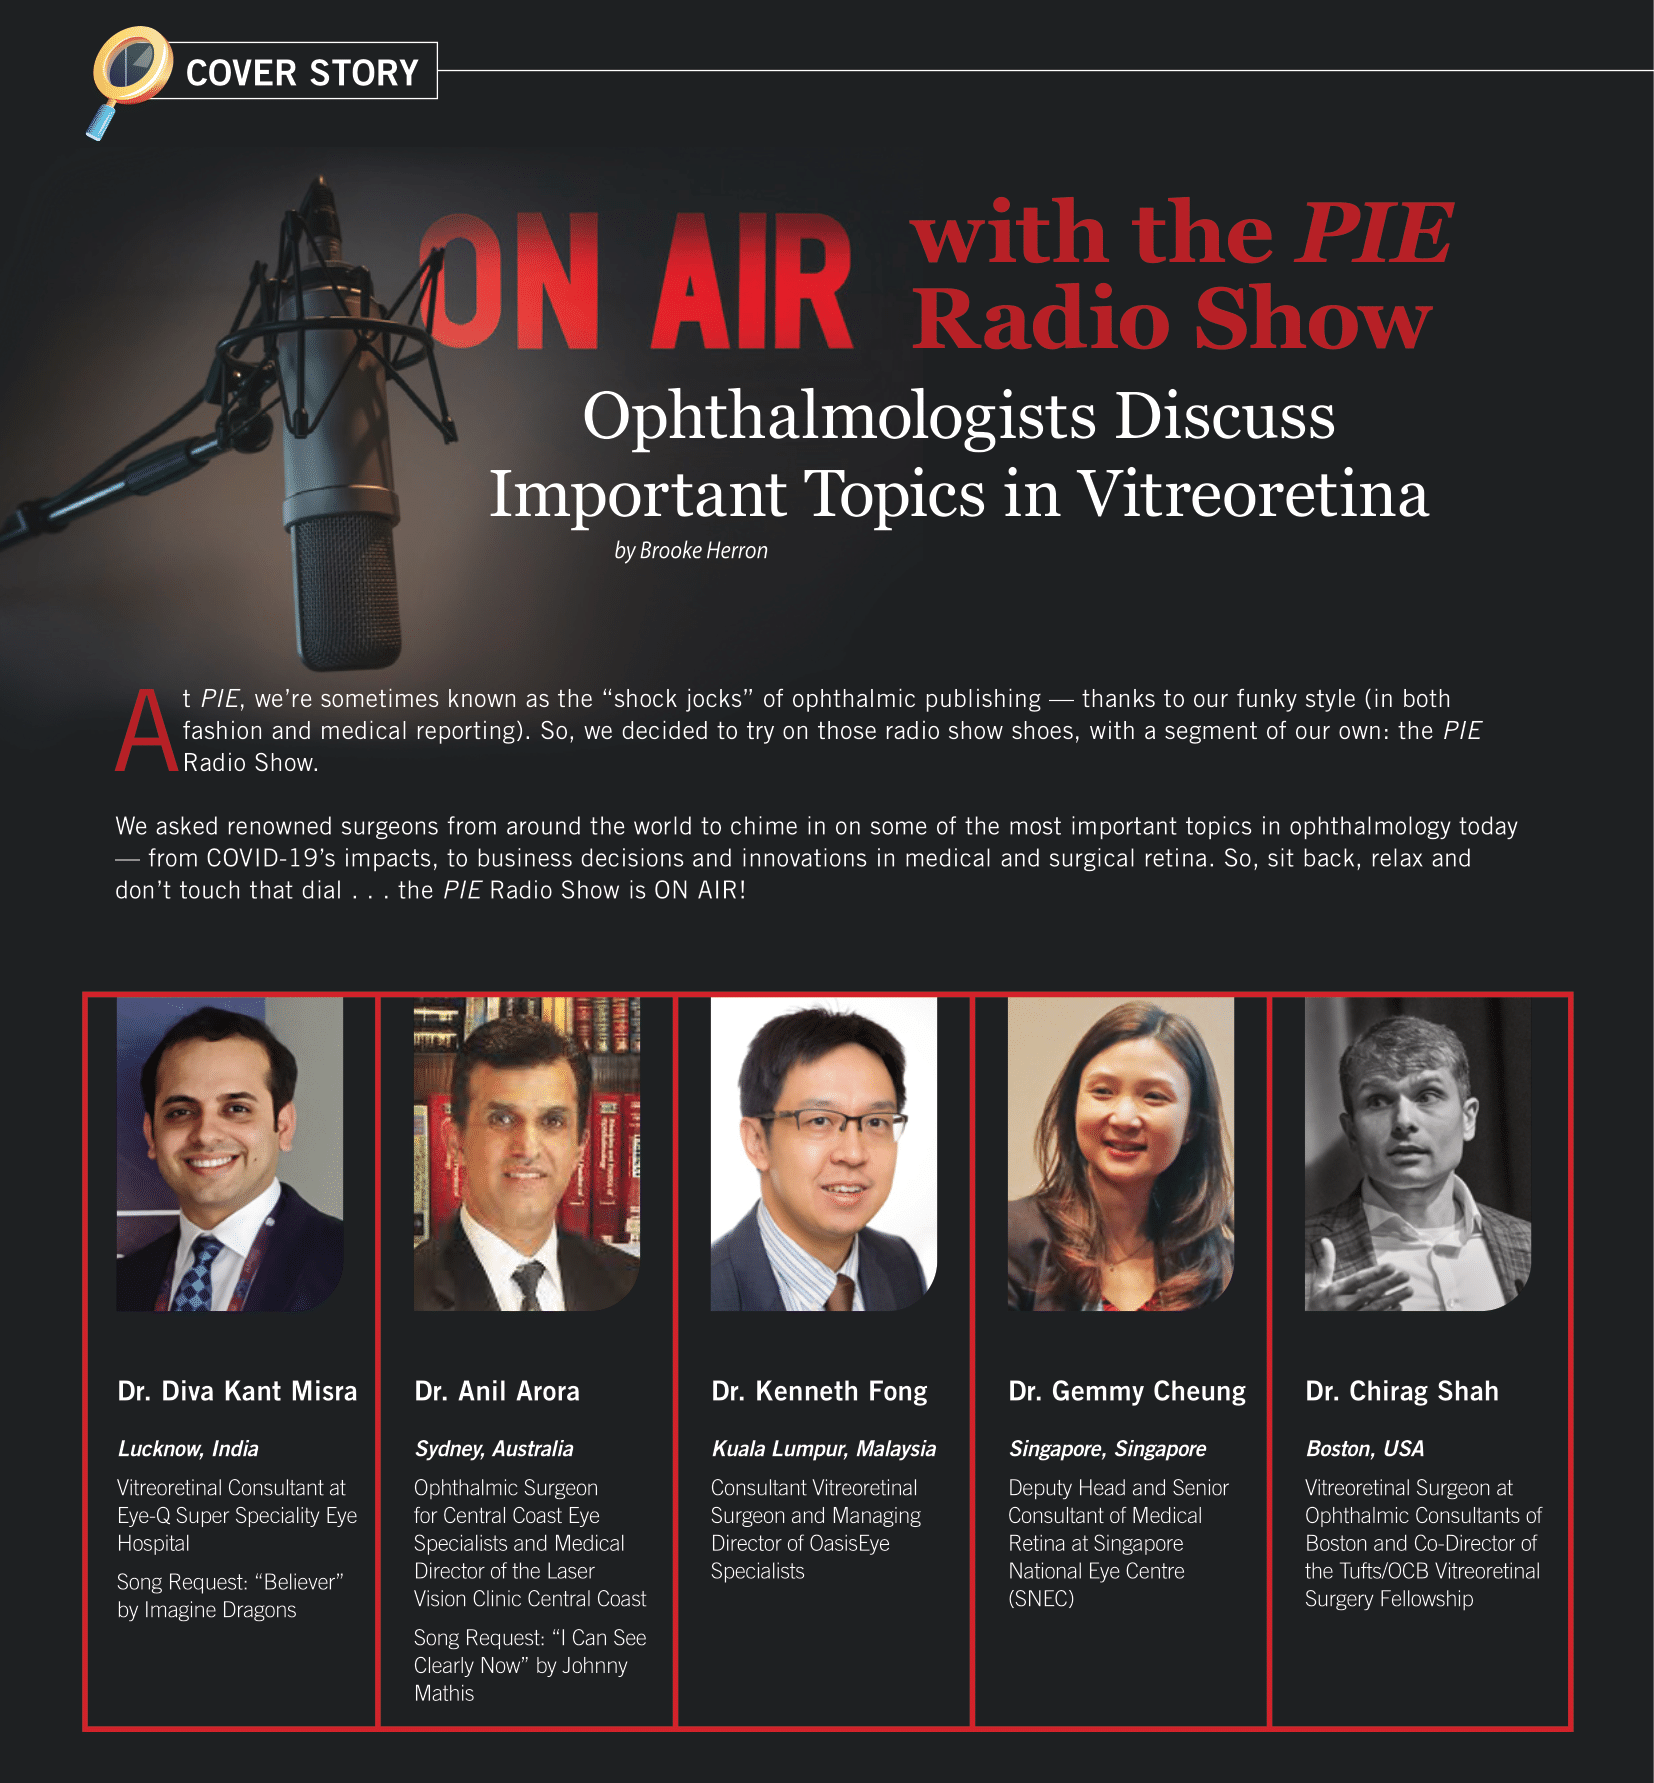 Ophthalmologists Discuss Important Topics in Vitreoretina